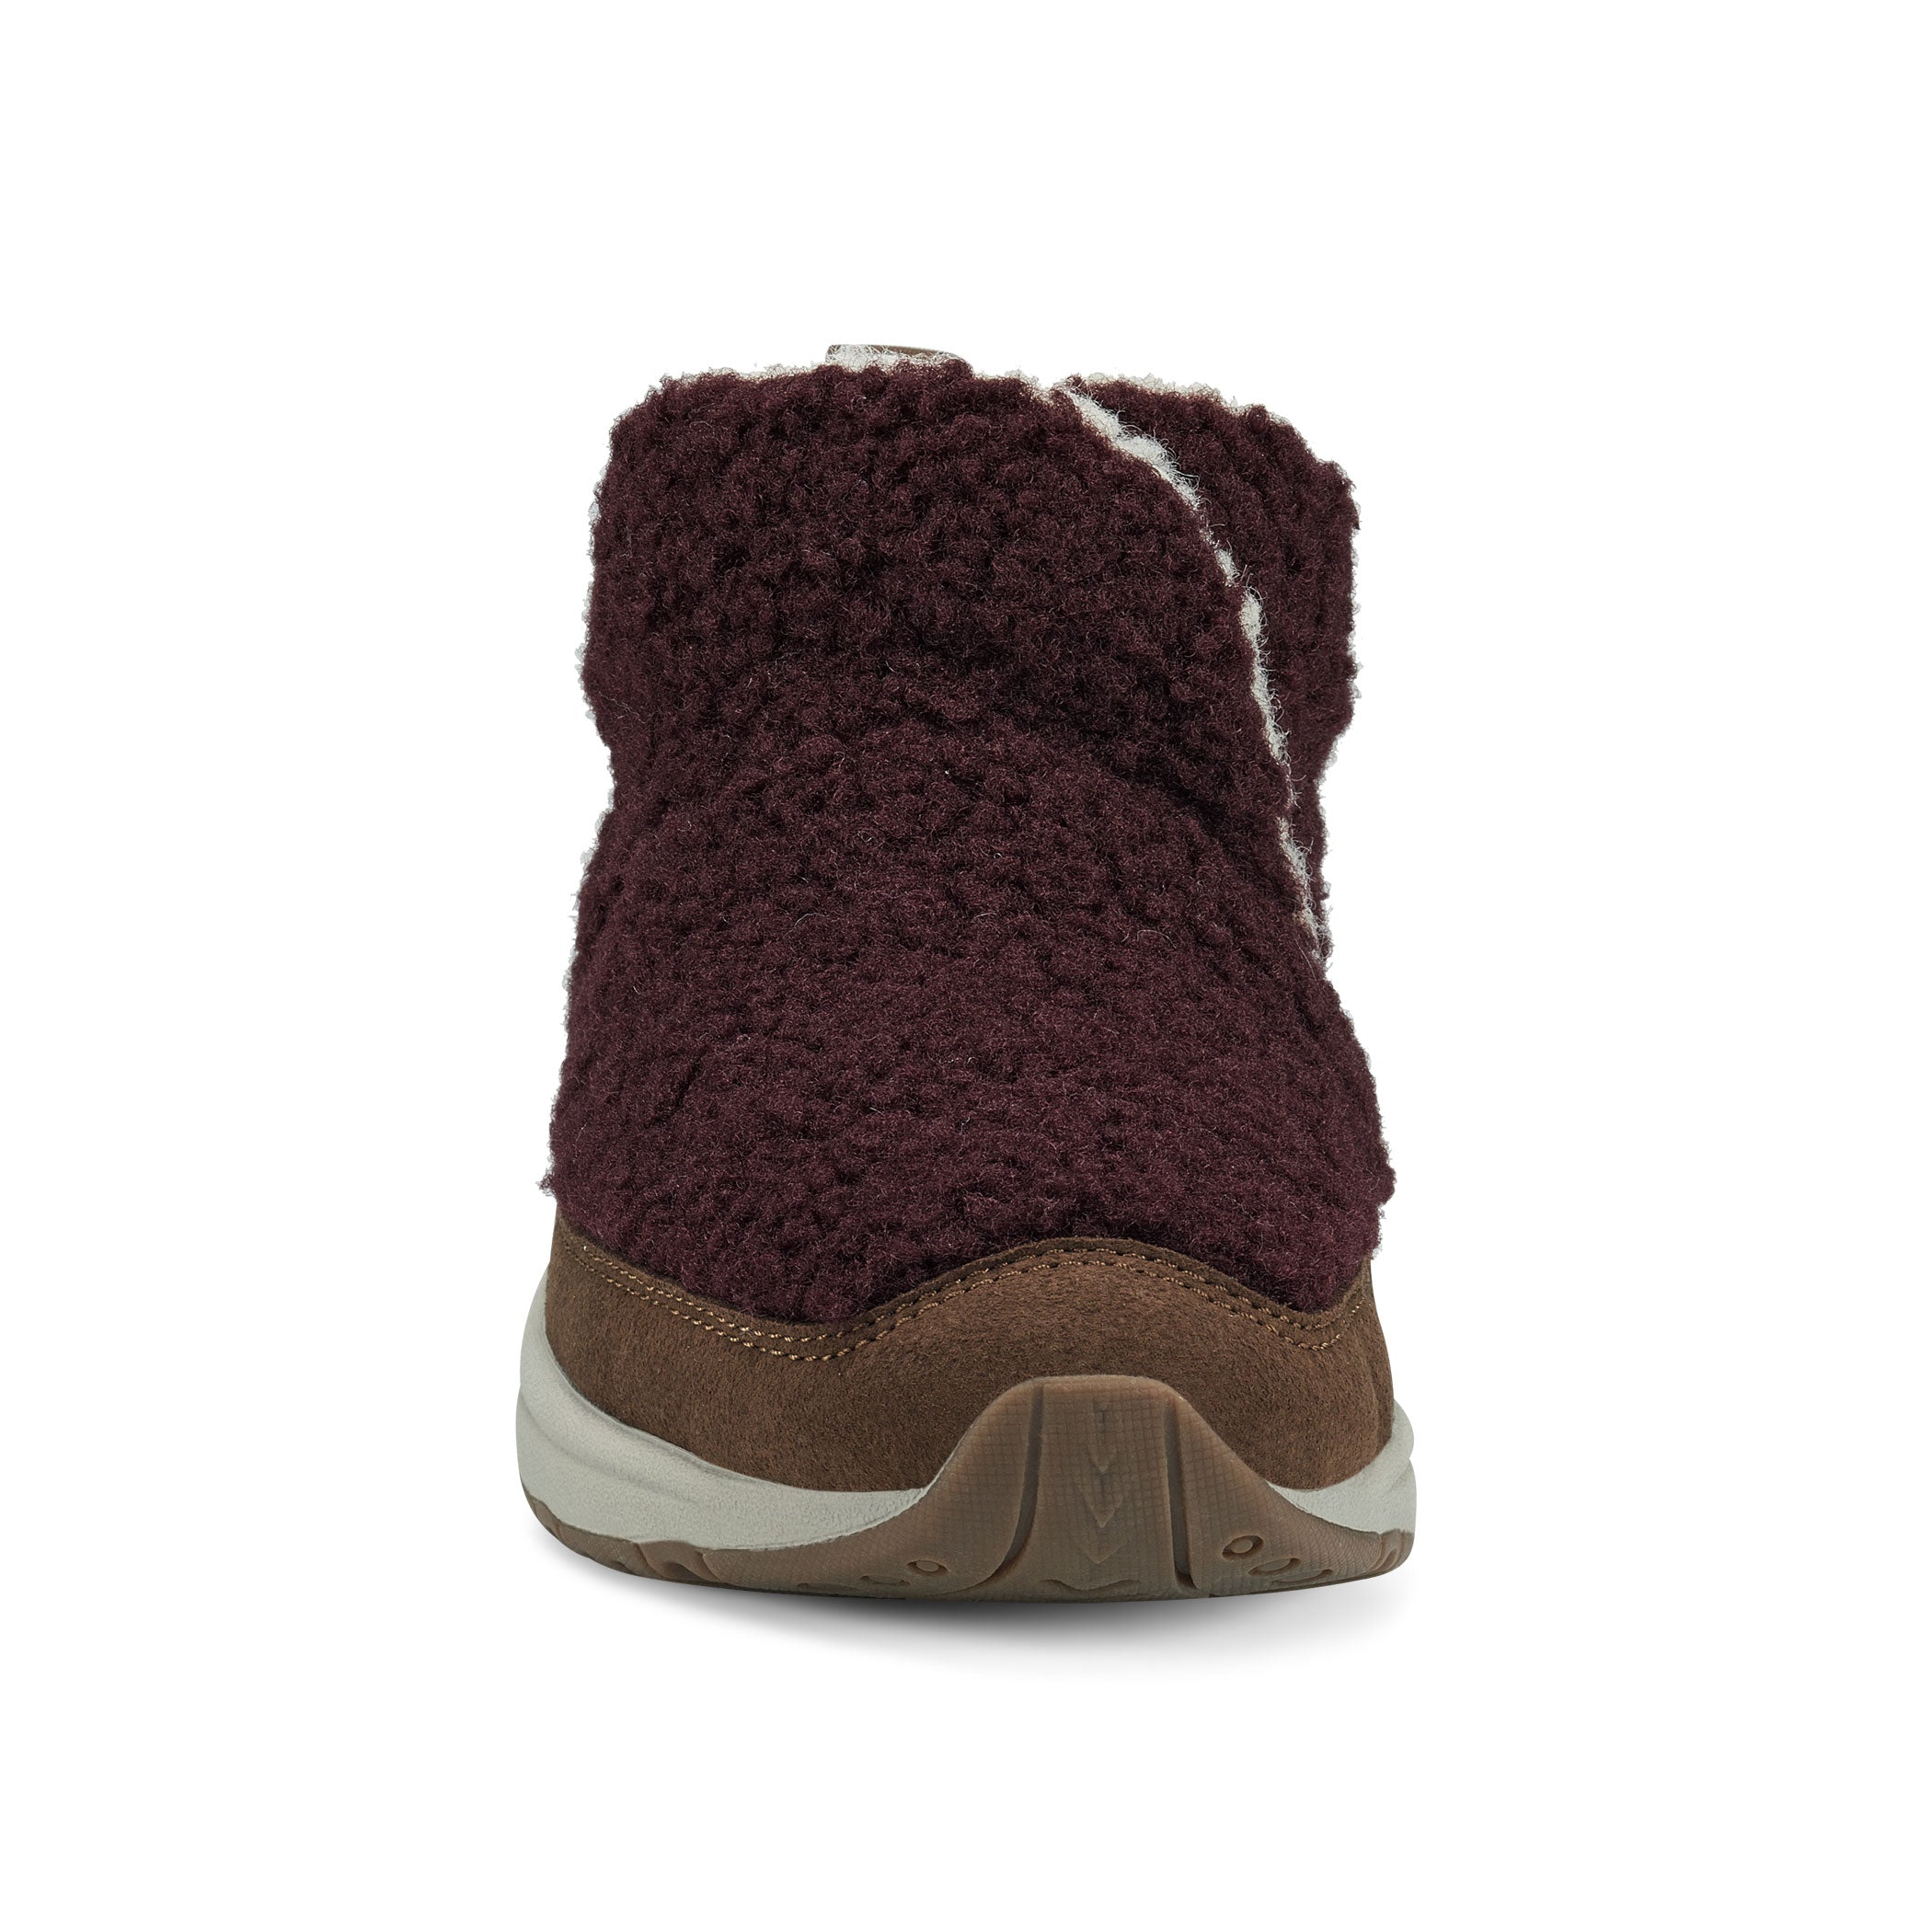 Trippin Cozy Booties